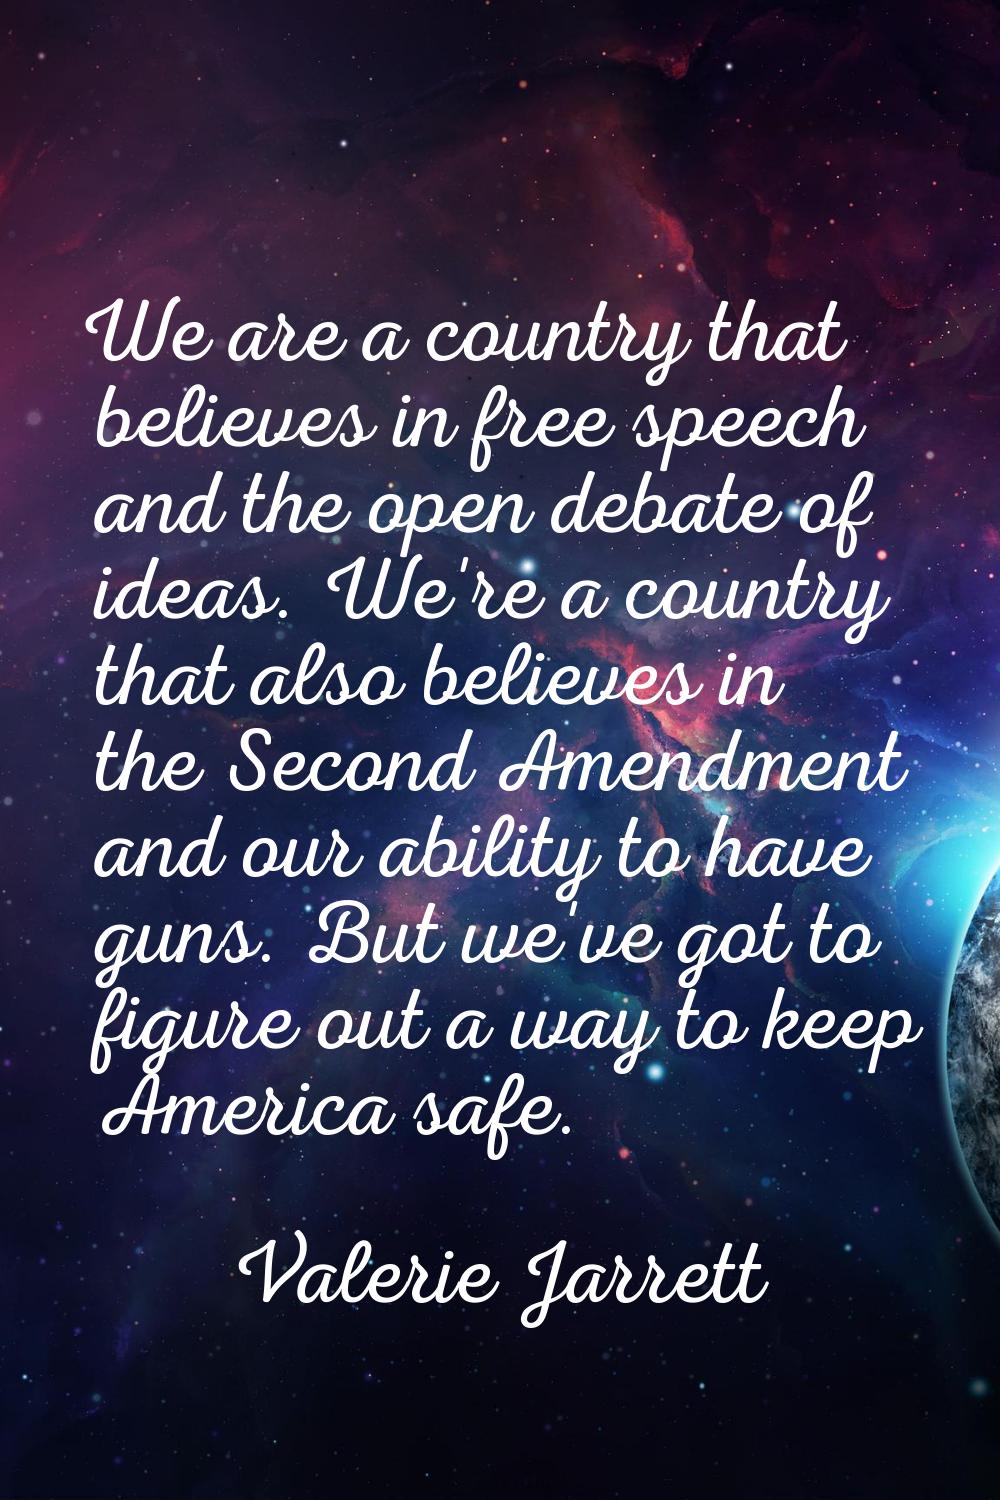 We are a country that believes in free speech and the open debate of ideas. We're a country that al